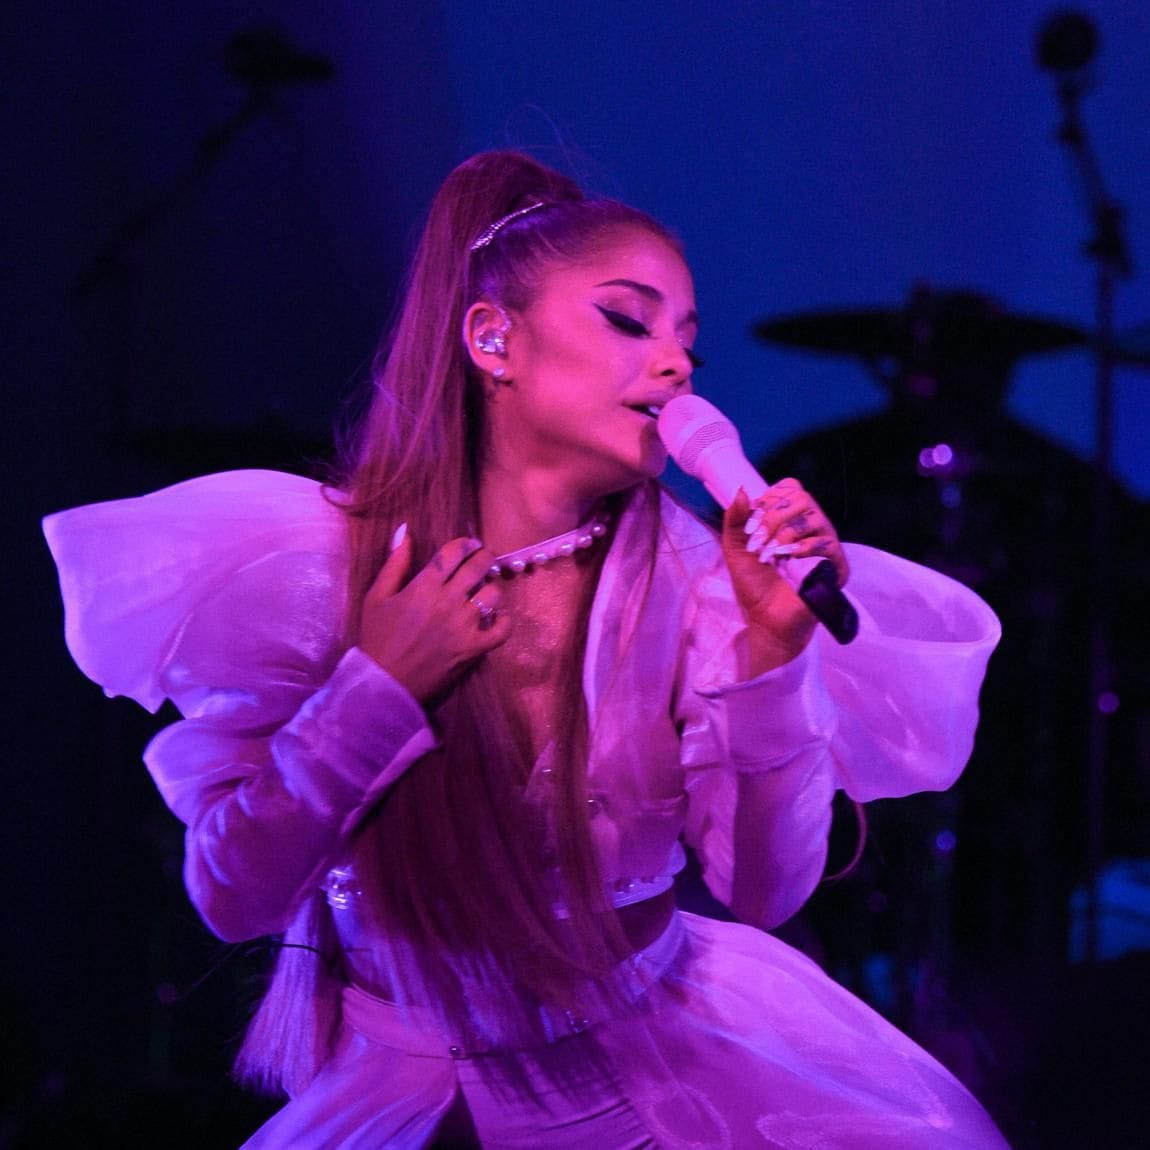 Ariana Grande wears elegant manicures for any occasion.